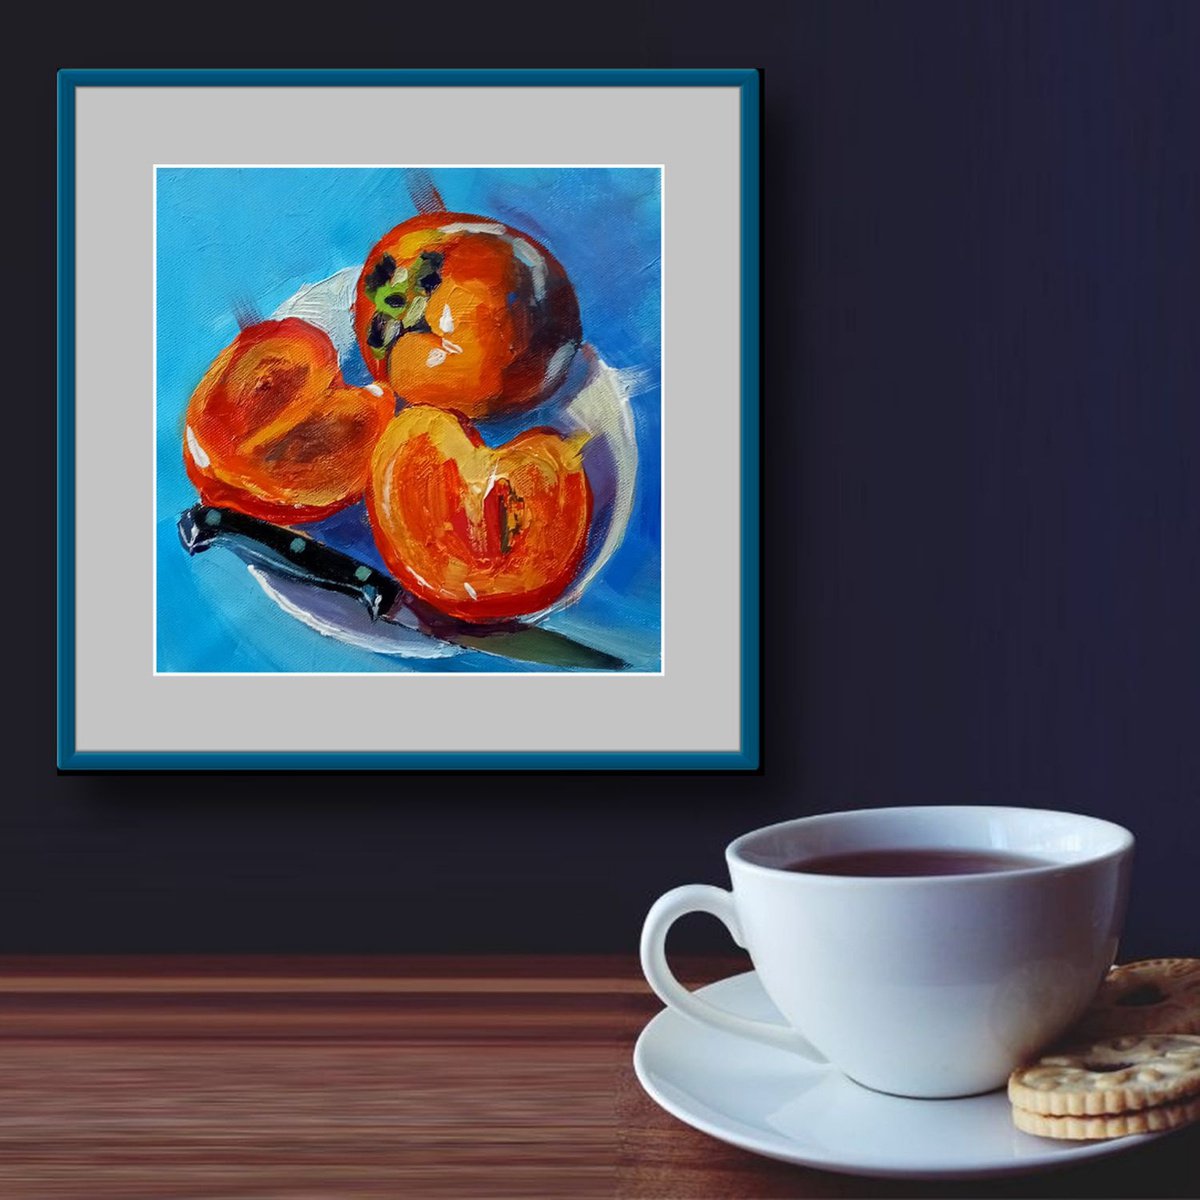 ’JUICY PERSIMMONS’ - Small Acrylic Painting on Panel by Ion Sheremet